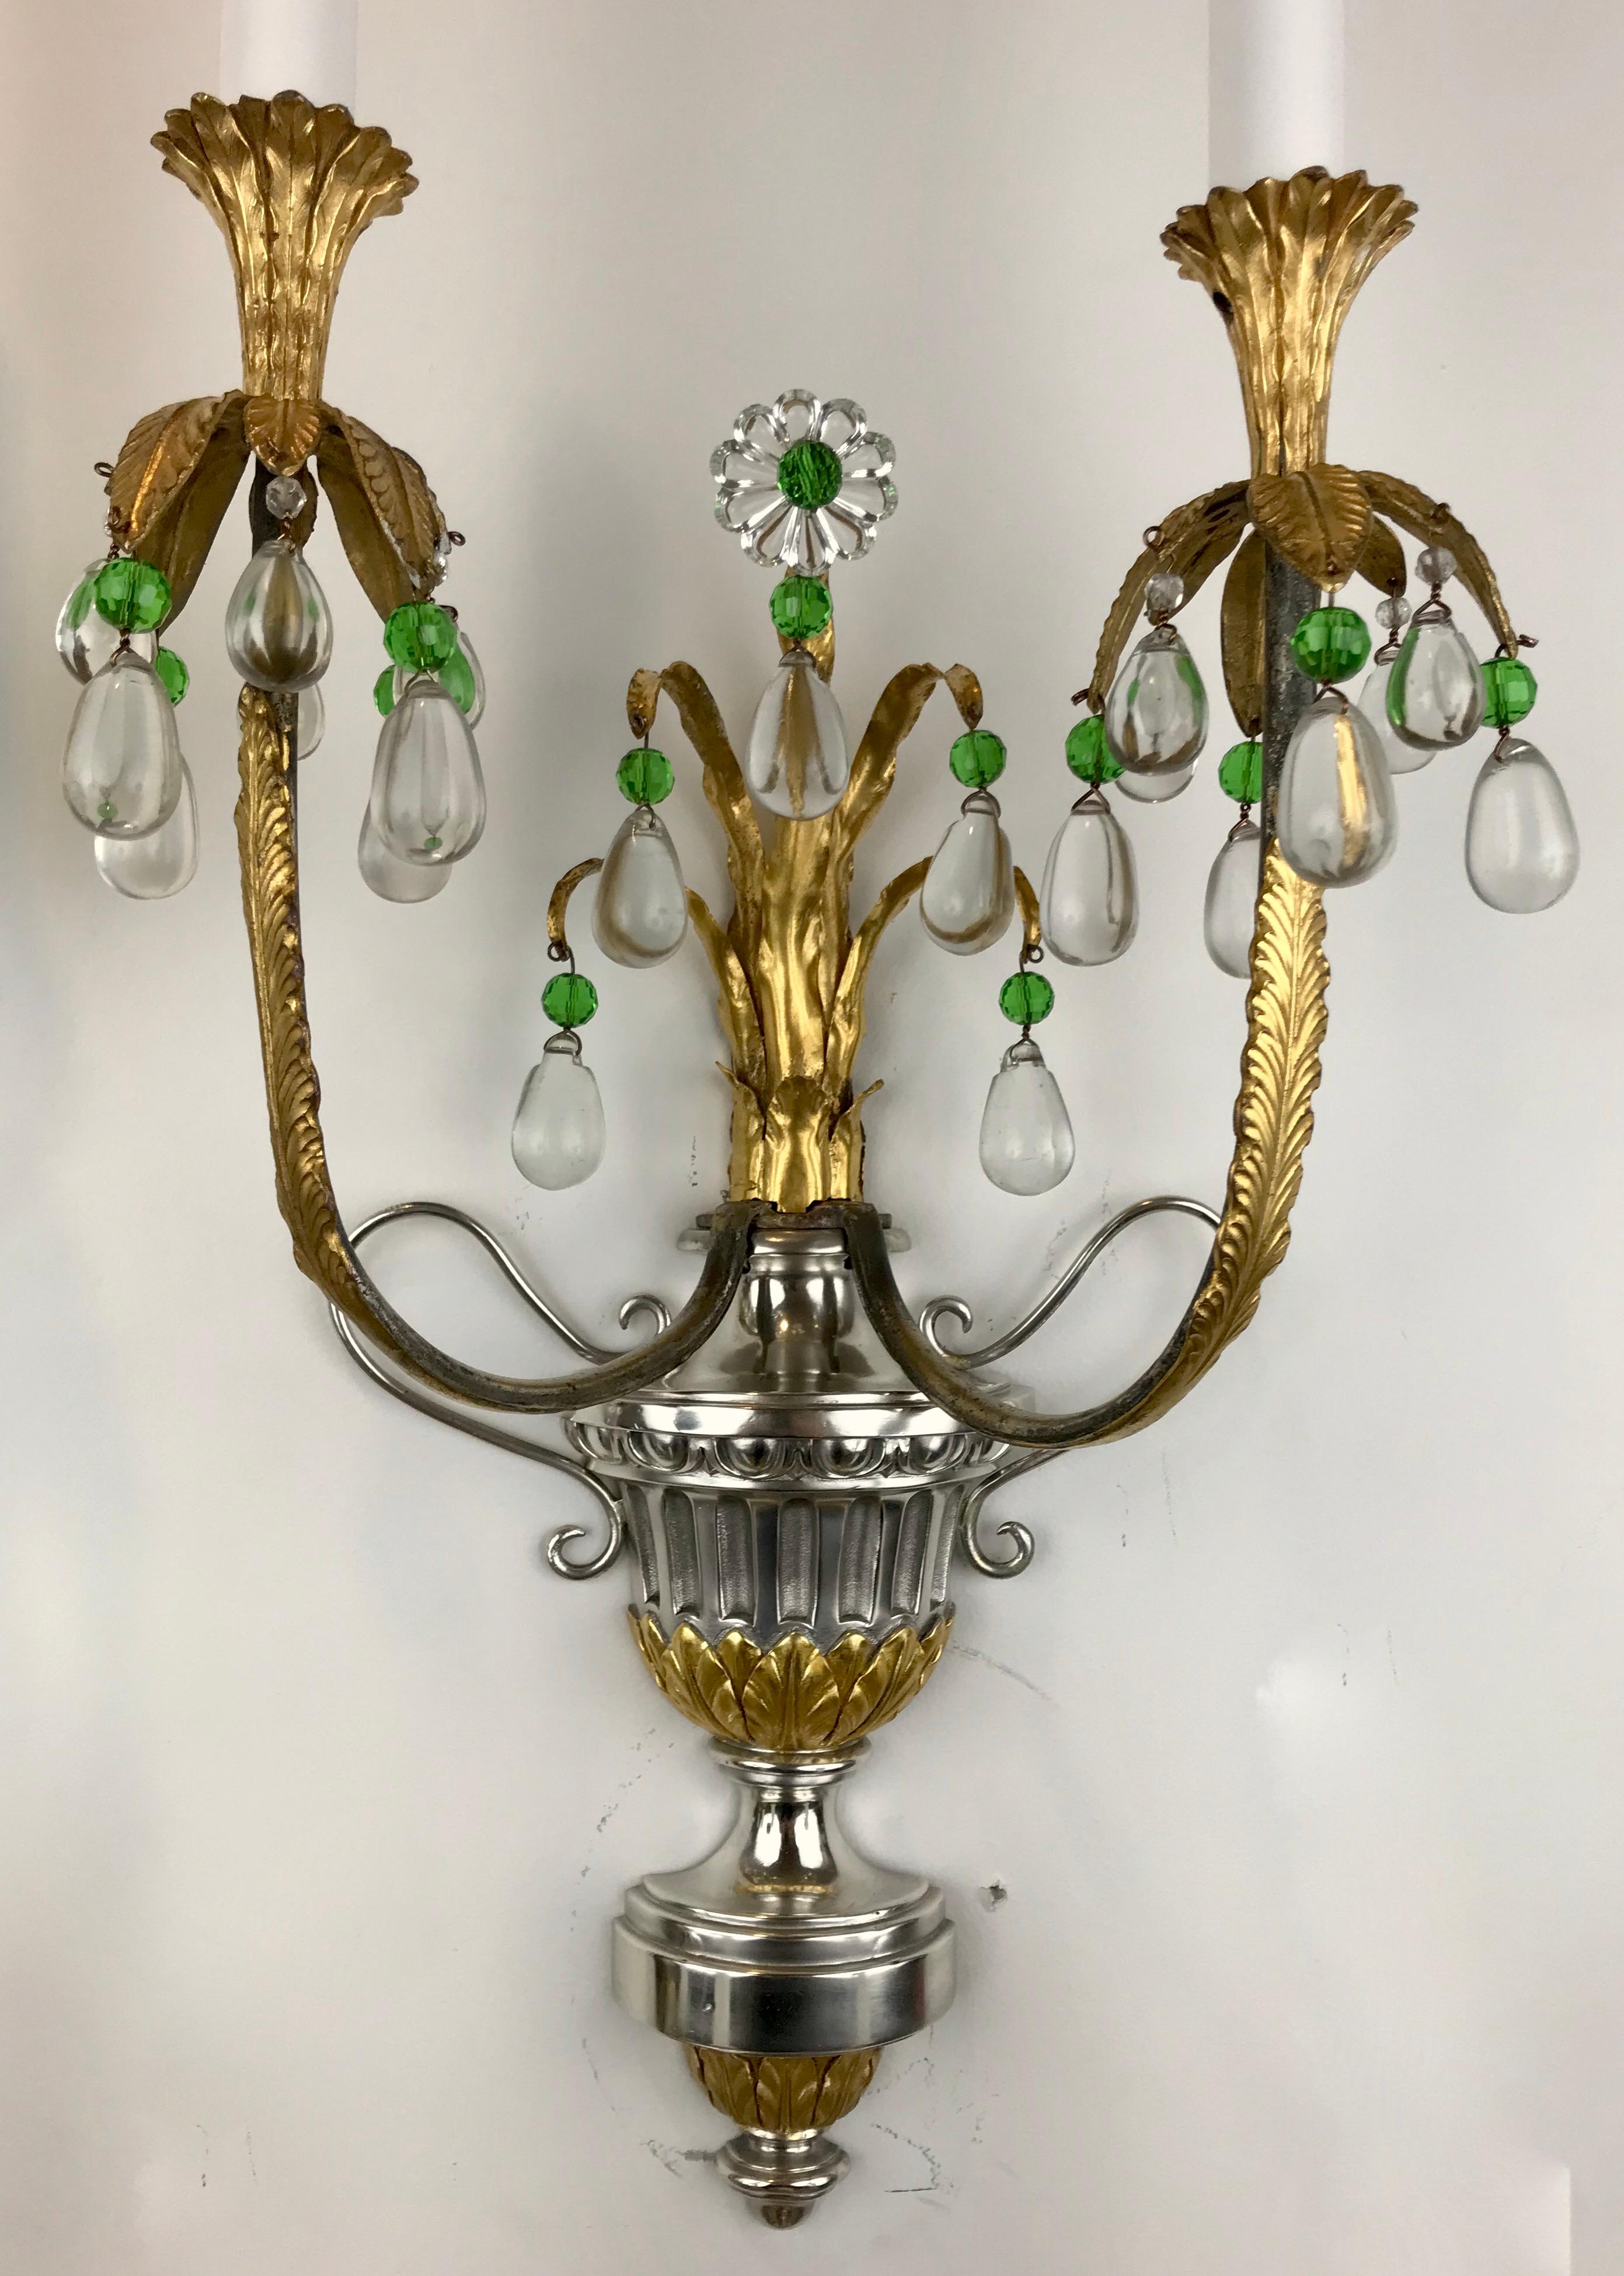 This set of four signed E.F. Caldwell sconces consisting of campana urn form backplates, issuing gilt foliate sprigs, terminating in emerald and clear crystal drops. They are beautifully hand made, and can be found pictured in the Caldwell archives